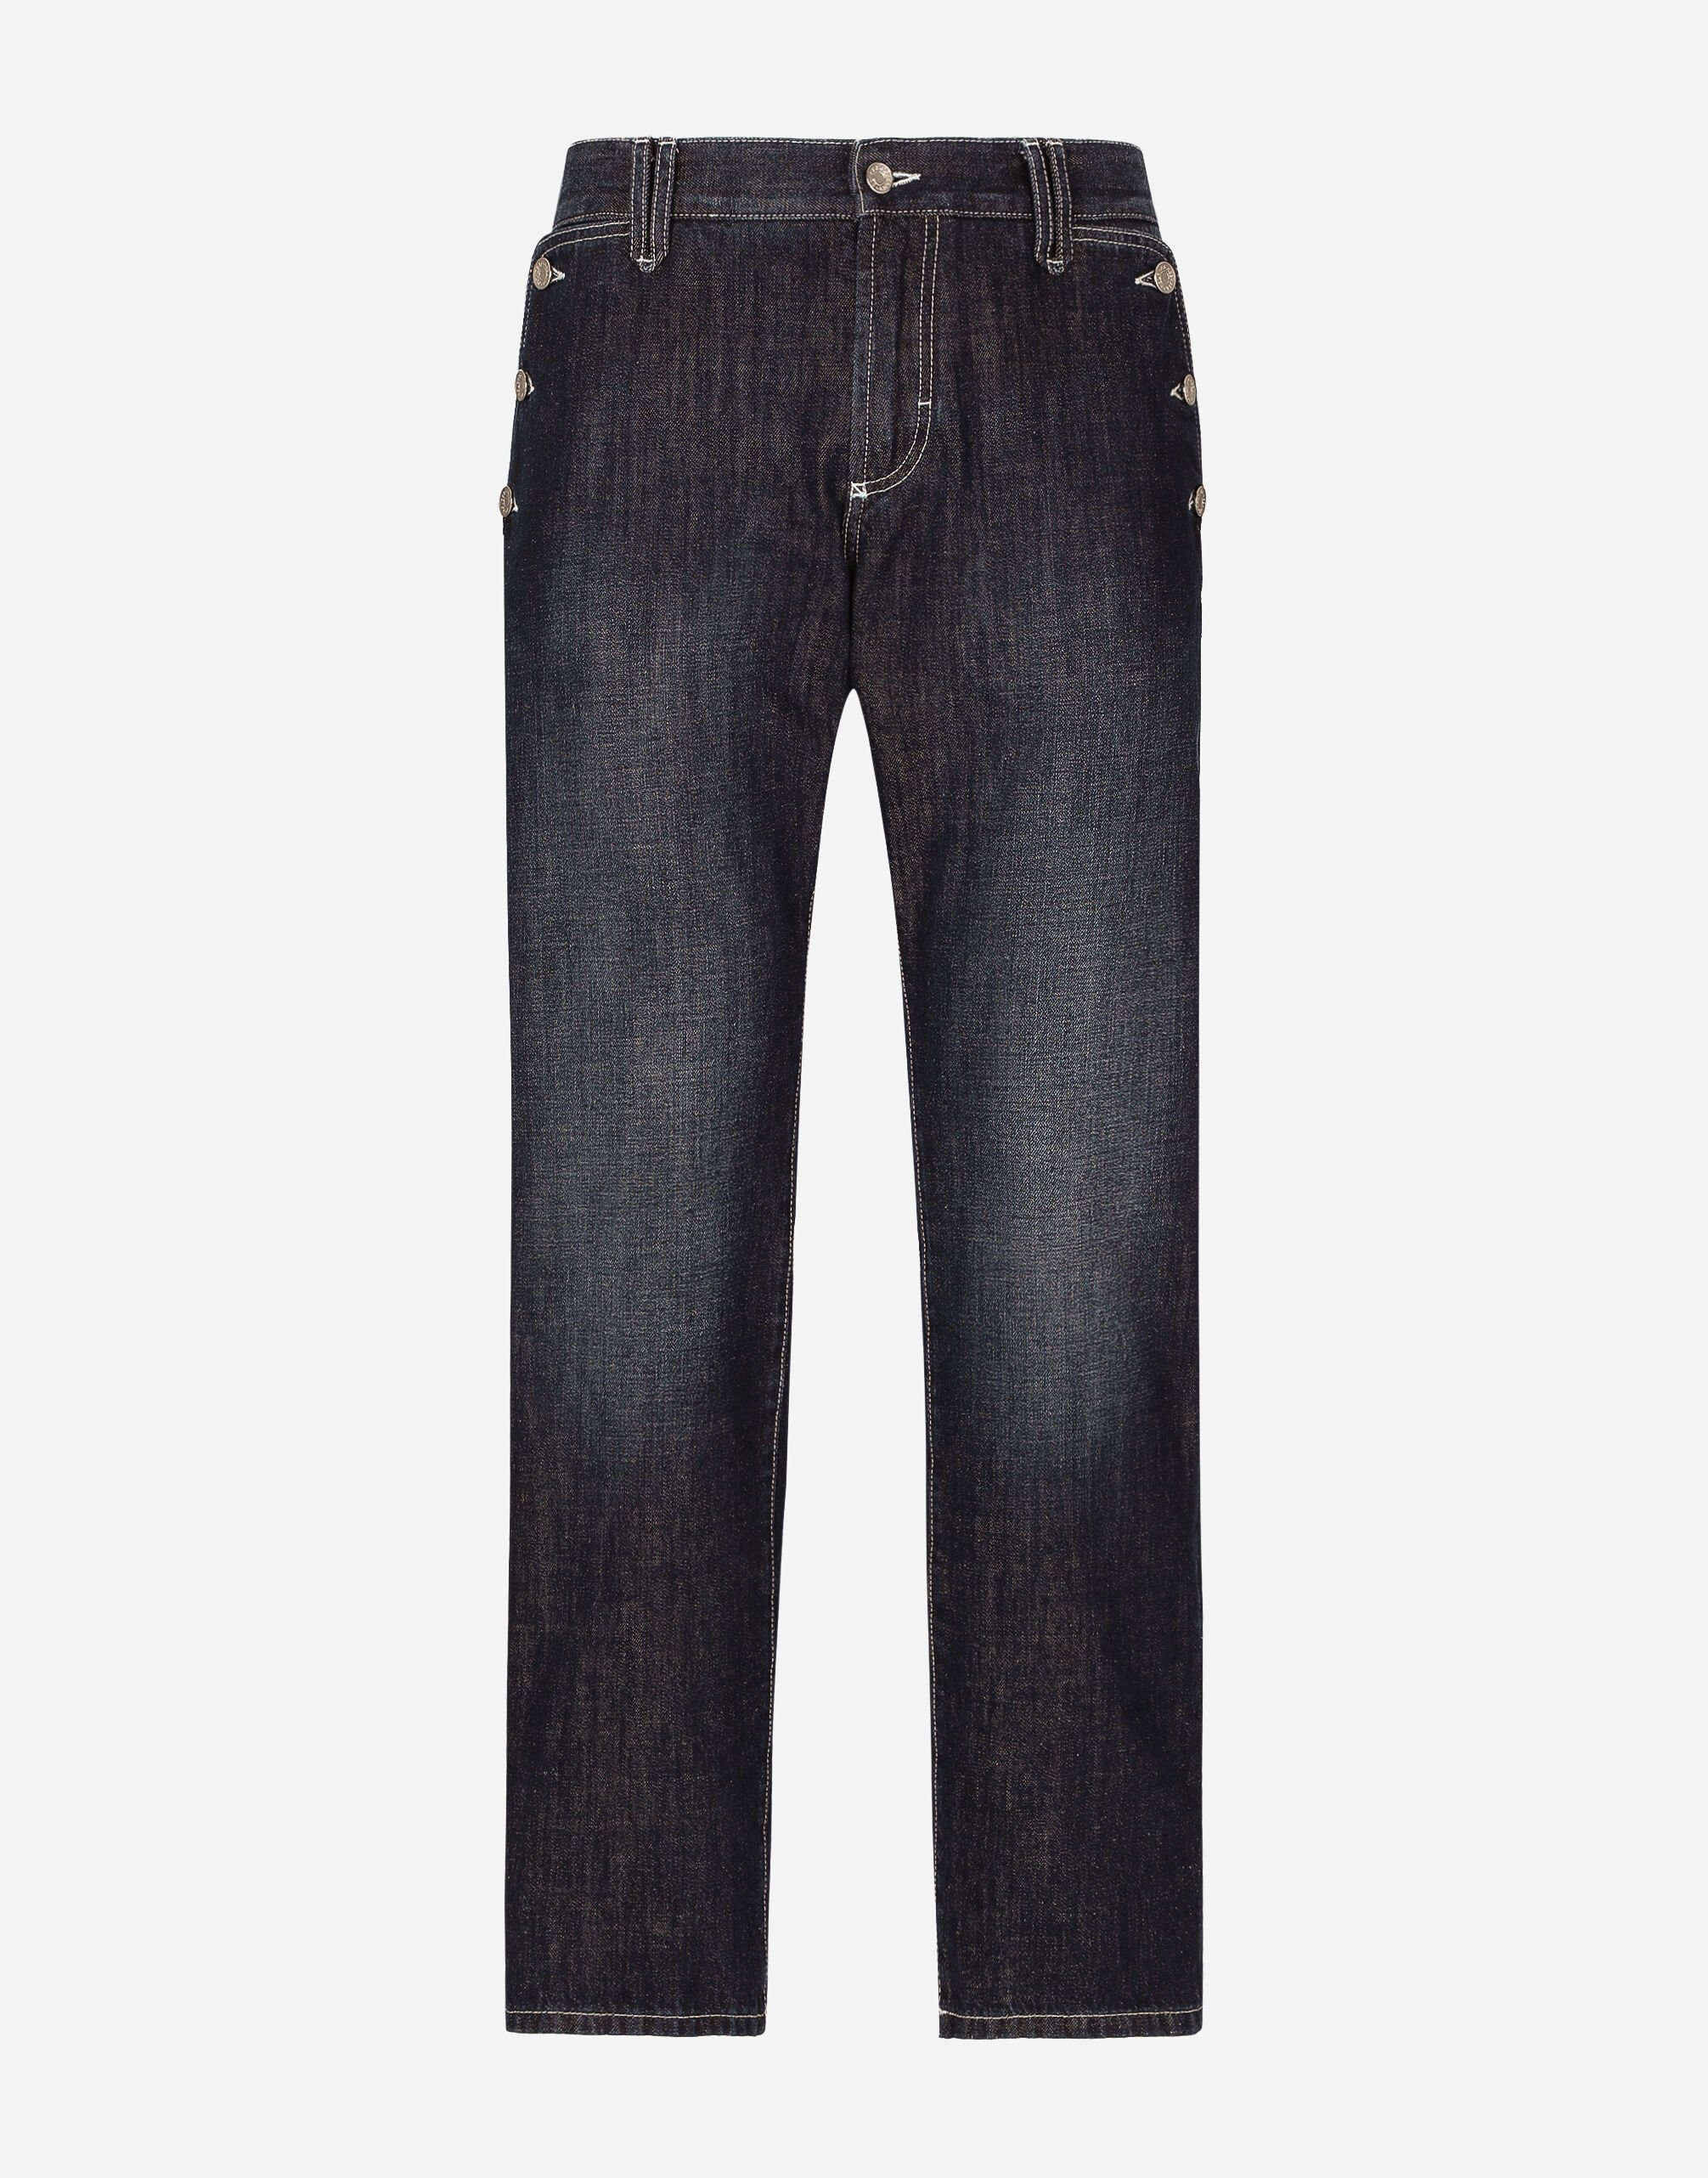 Classic blue denim jeans with sailor-style pocket in Blue for Men 